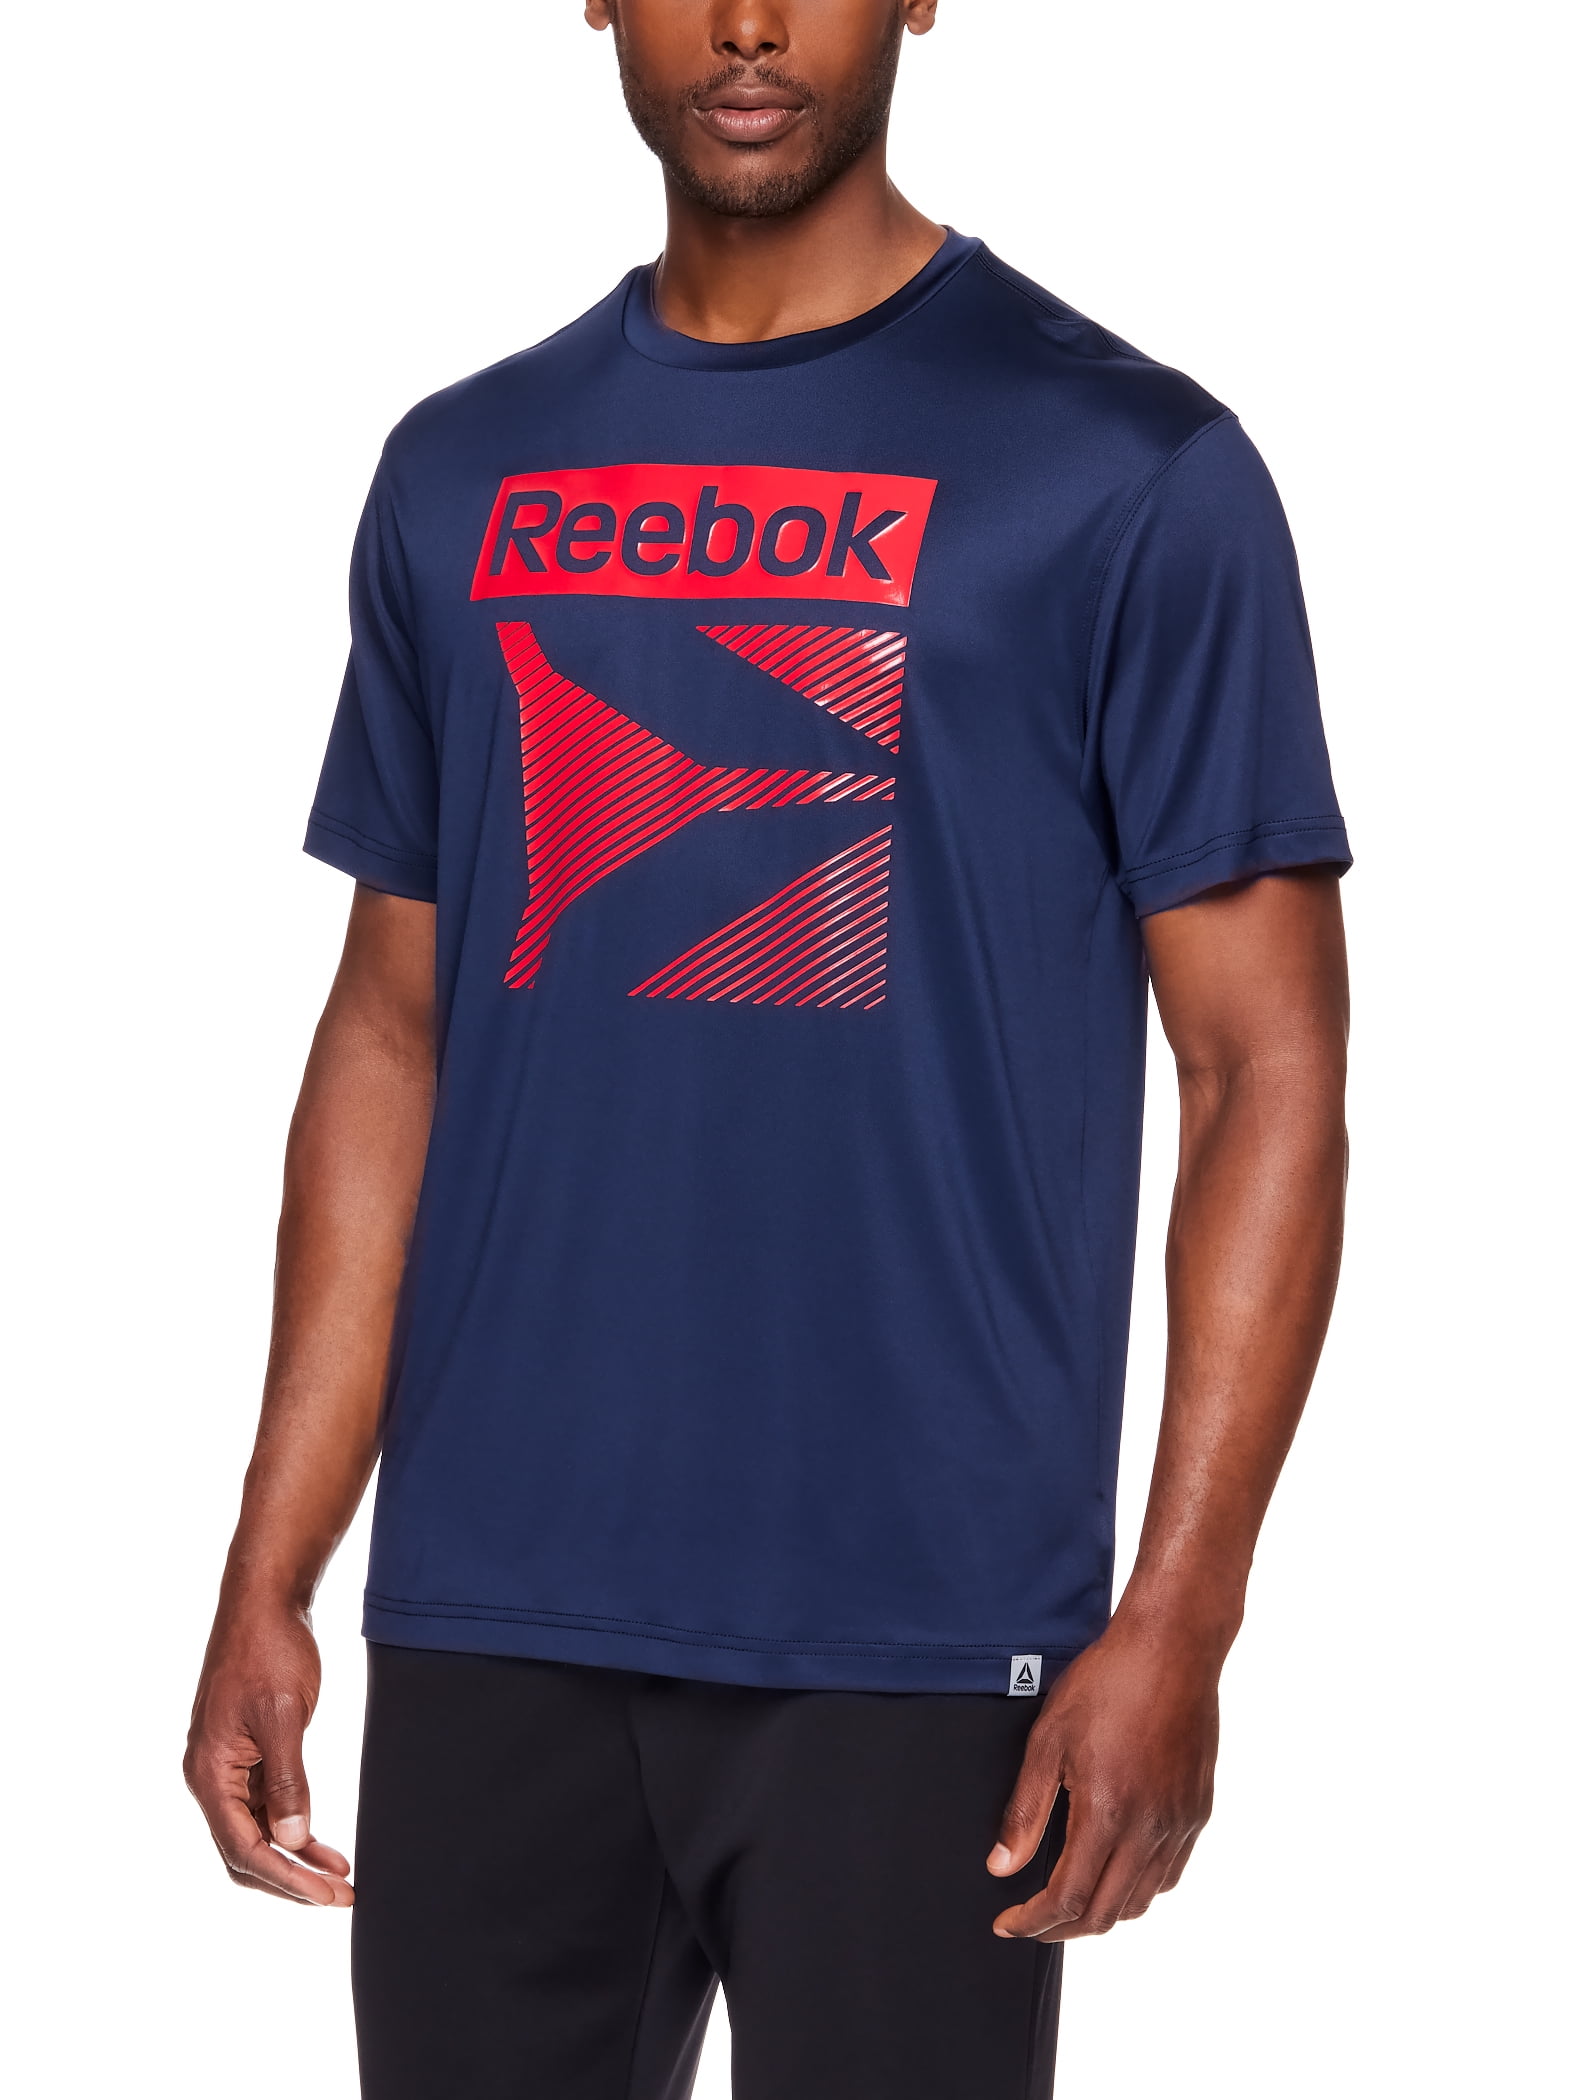 Reebok Men's and Big Men's Radiant Graphic T-Shirt, up to Size 3XL ...